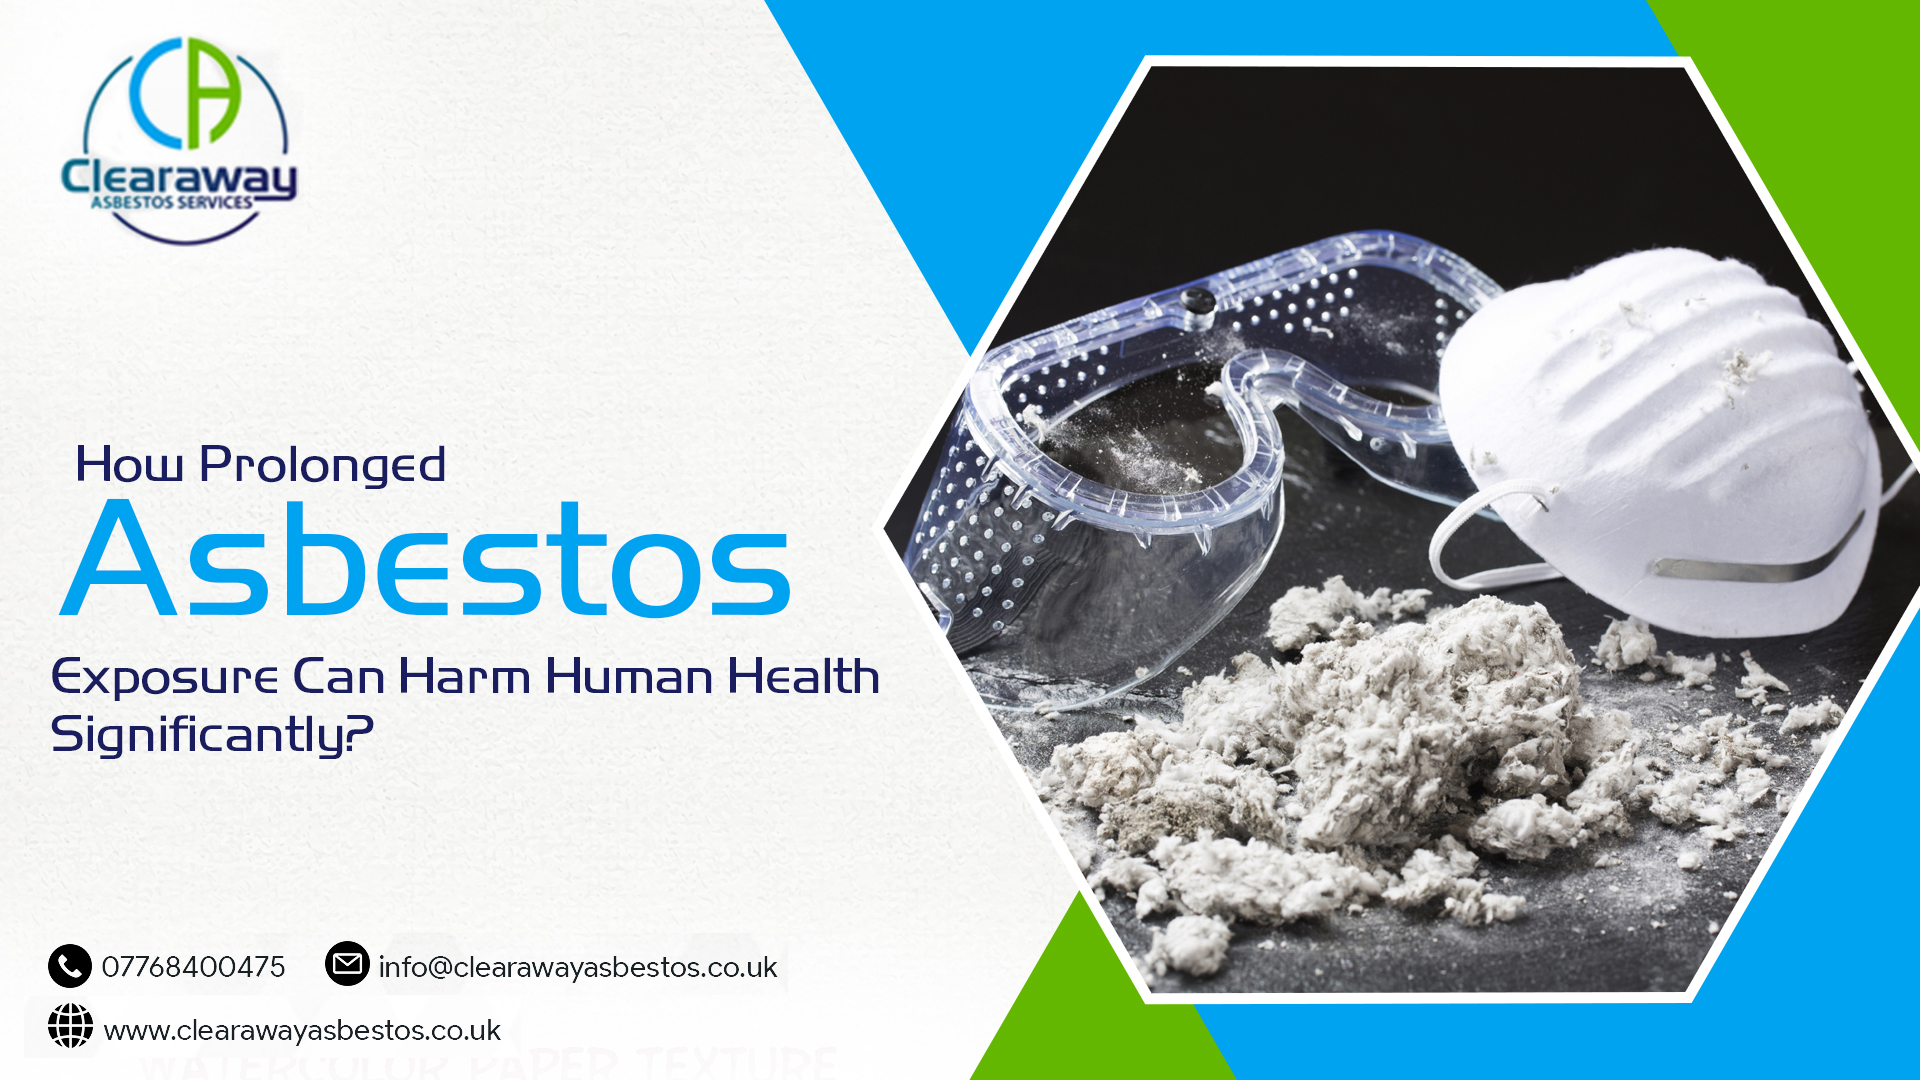 How Prolonged Asbestos Exposure Can Harm Human Health Significantly?